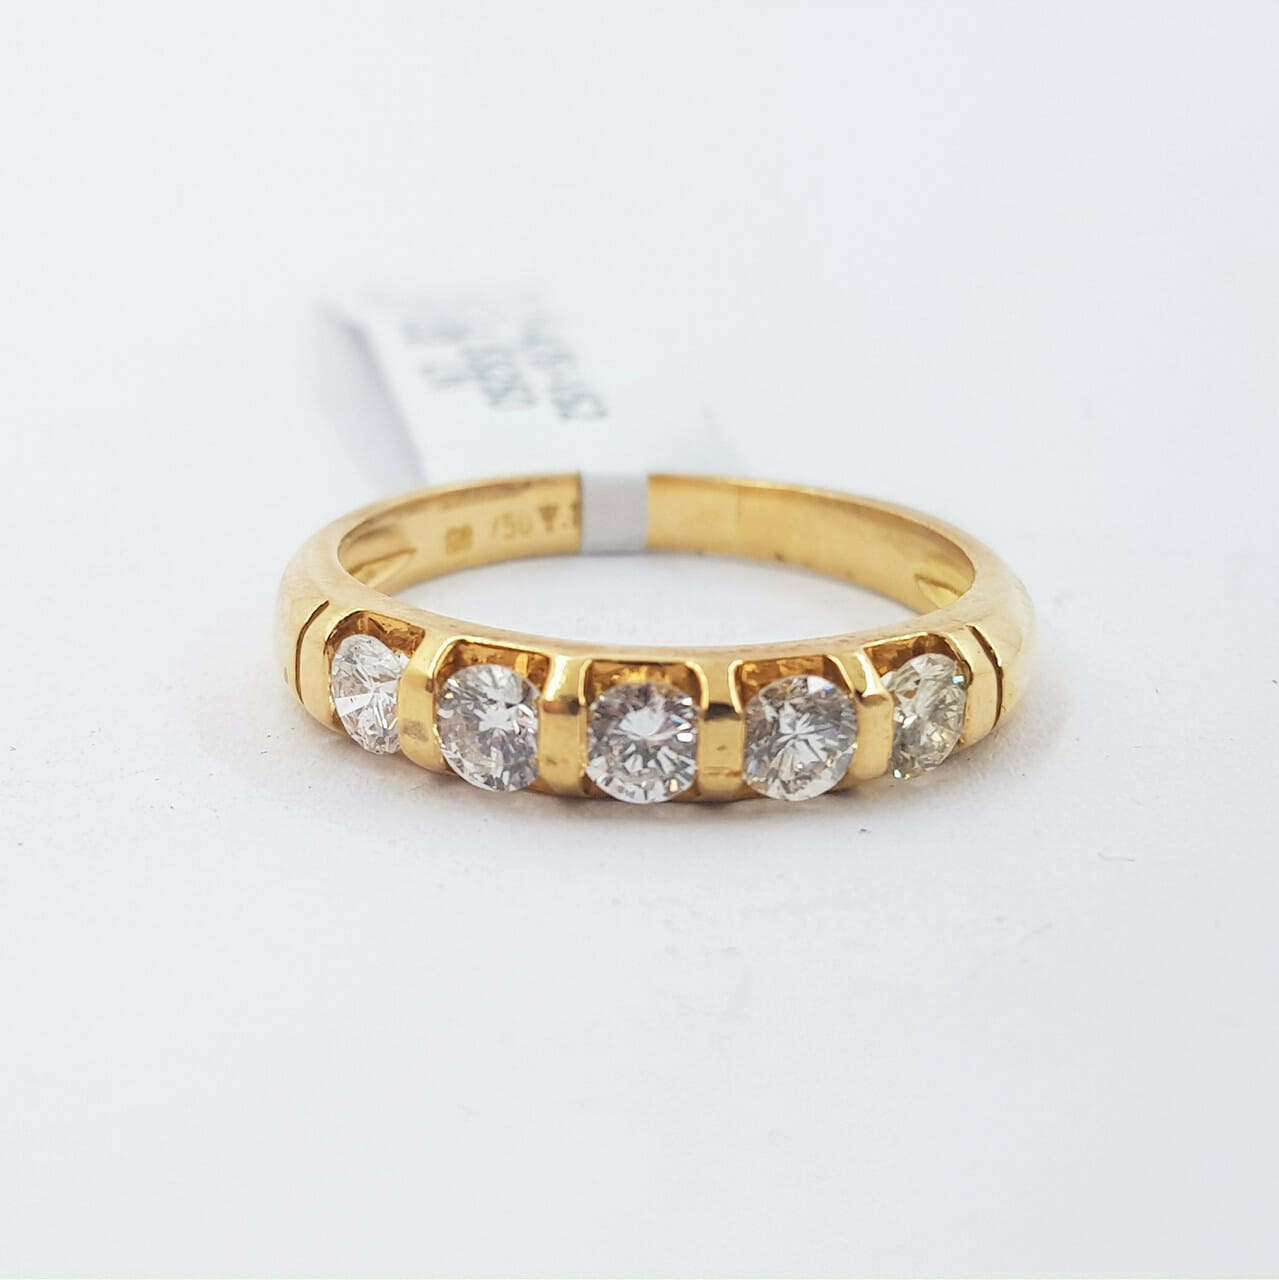 18CT YELLOW GOLD 0.6CT TDW CHANNEL SET DIAMOND BAND VAL $3250 SIZE N #41863